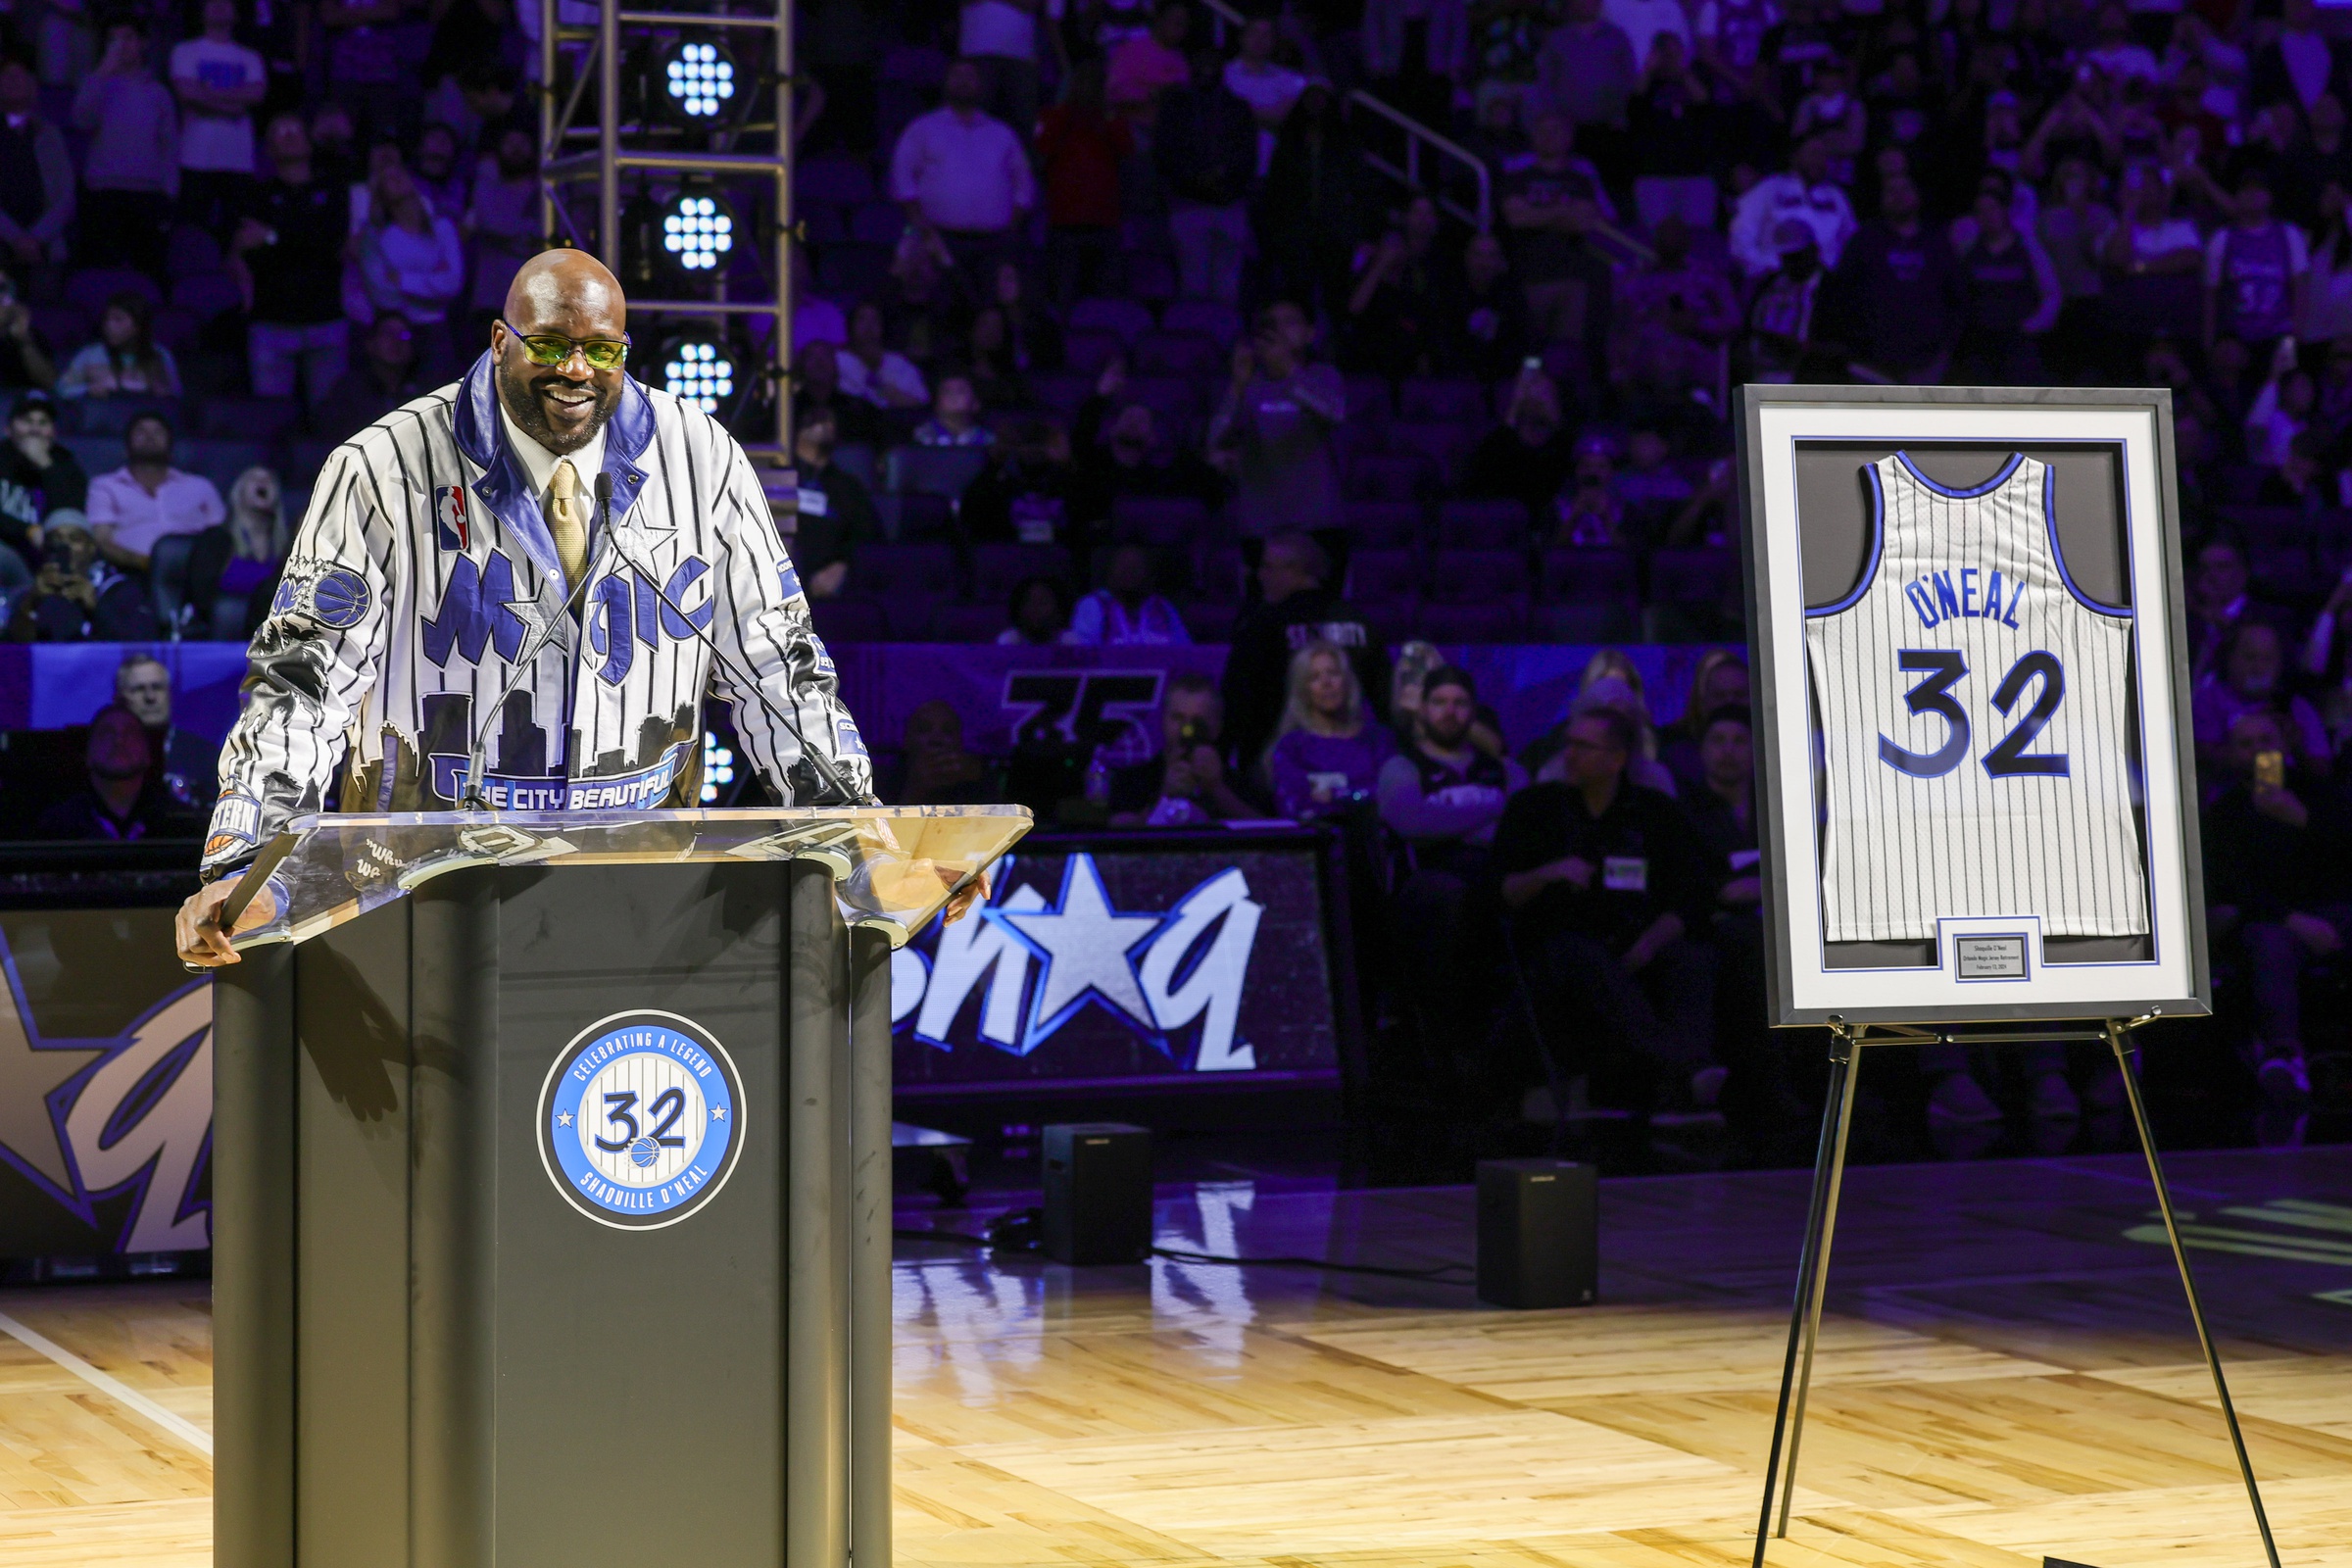 Shaquille O'Neal during a post game ceremony where the Orlando Magic retired his #32 jersey at Amway Center.